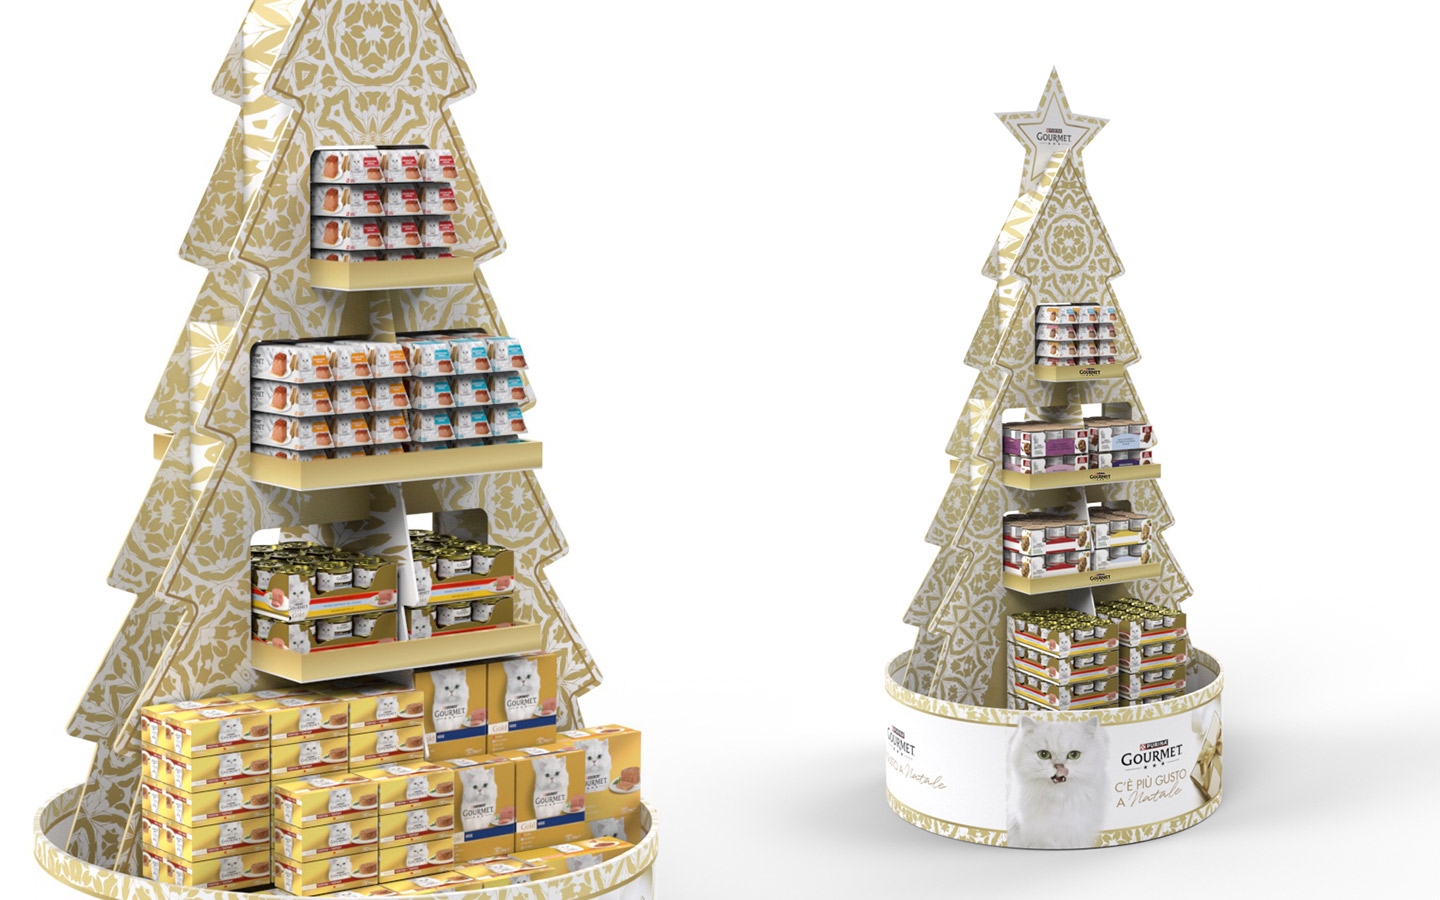 The Christmas standing display unit created by ATC for Purina Gourmet